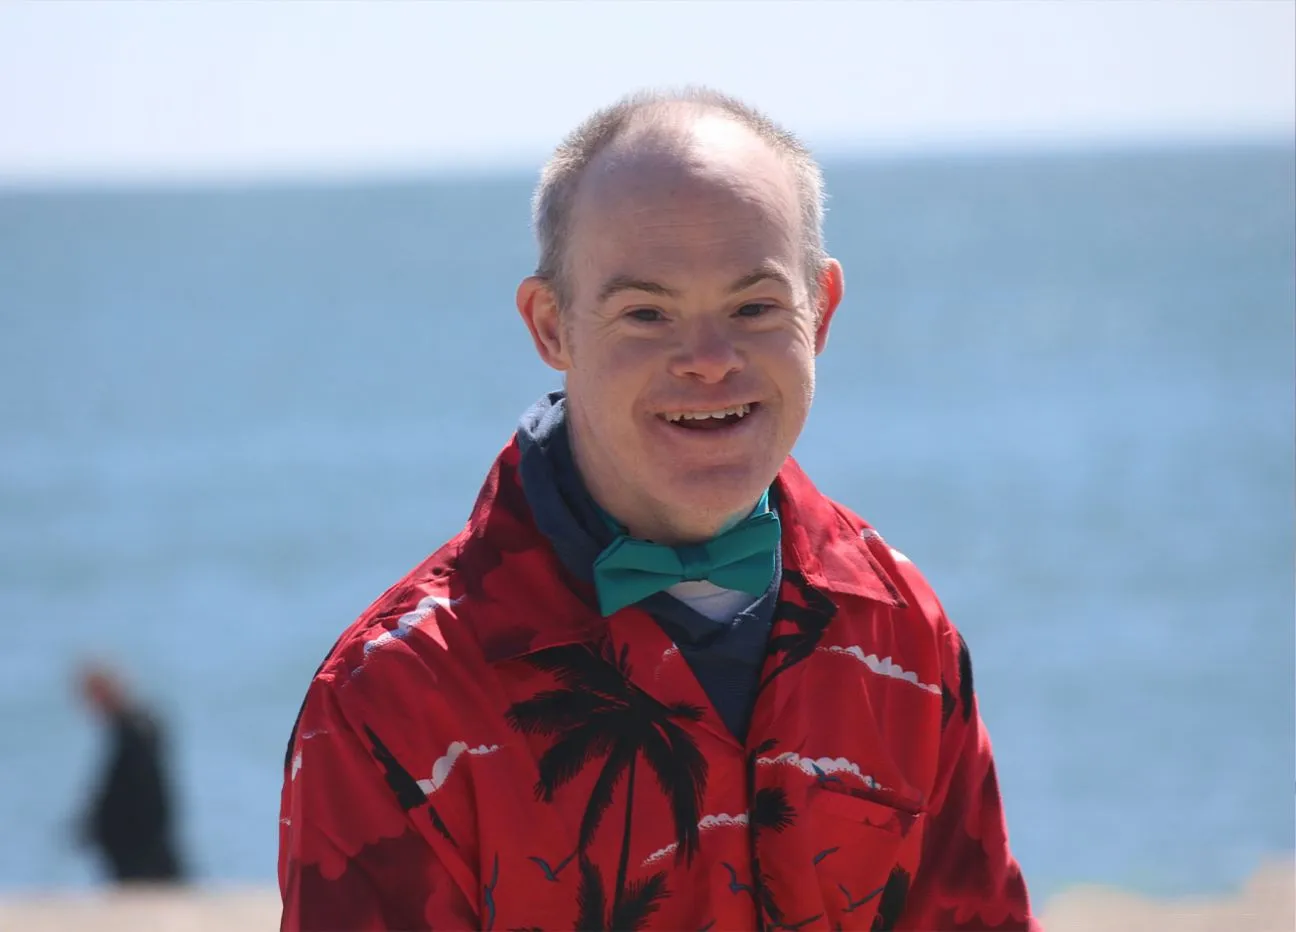 Male smiling by a body of water wearing a teal bowtie and red tropical shirt.